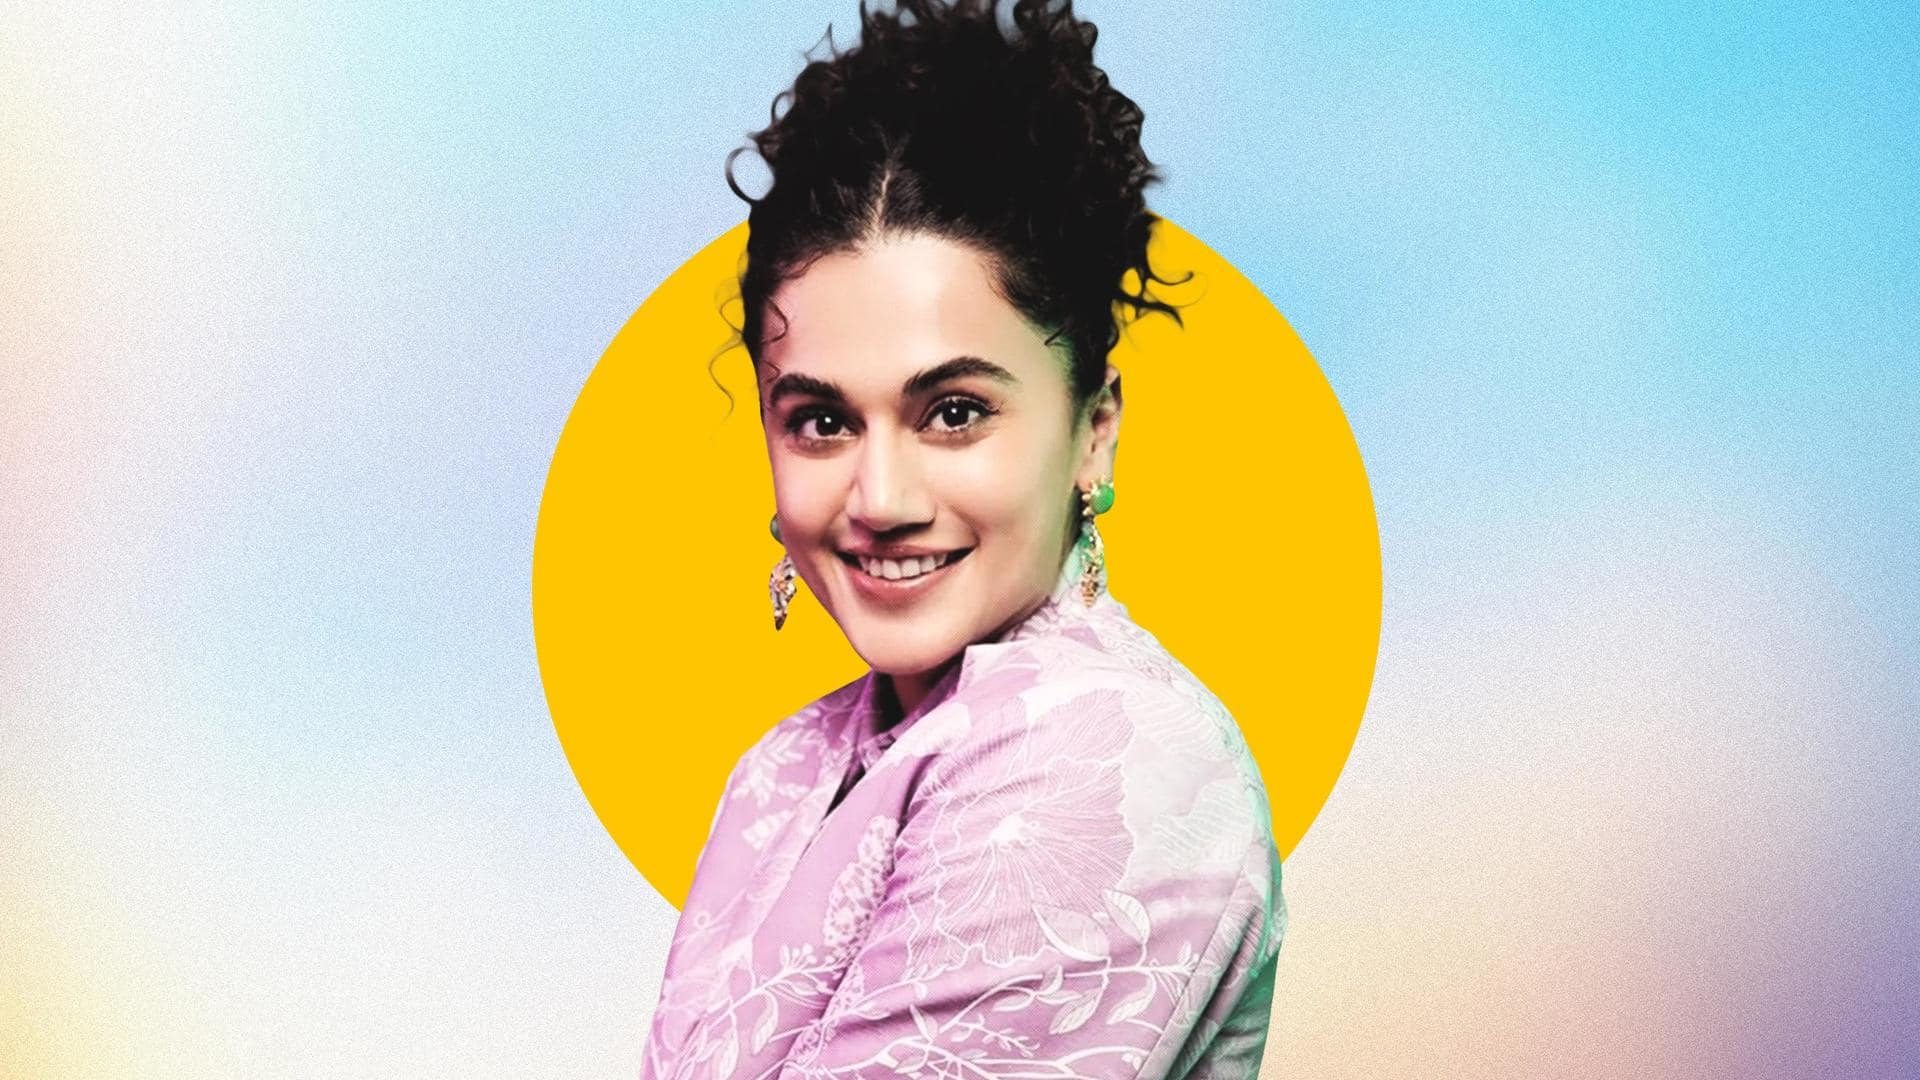 Happy Birthday, Taapsee Pannu! Sharing the actor's beauty secrets